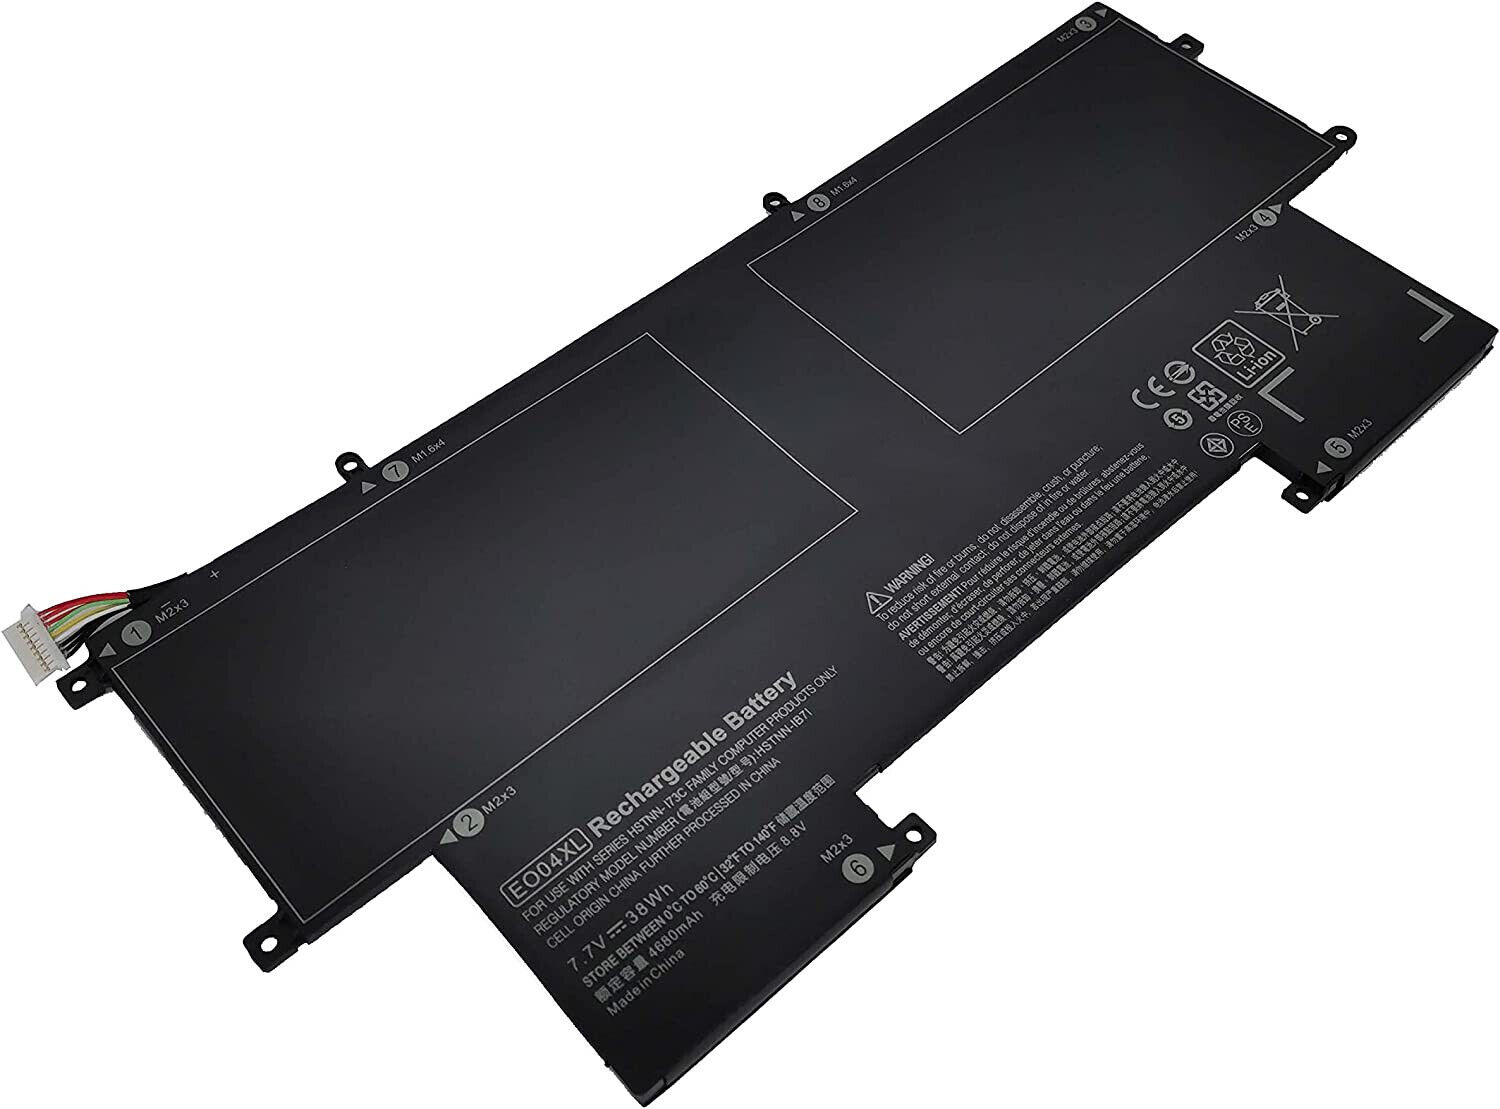 Type EO04XL Battery 38Wh Replacement Battery for HP EliteBook Folio G1 Series